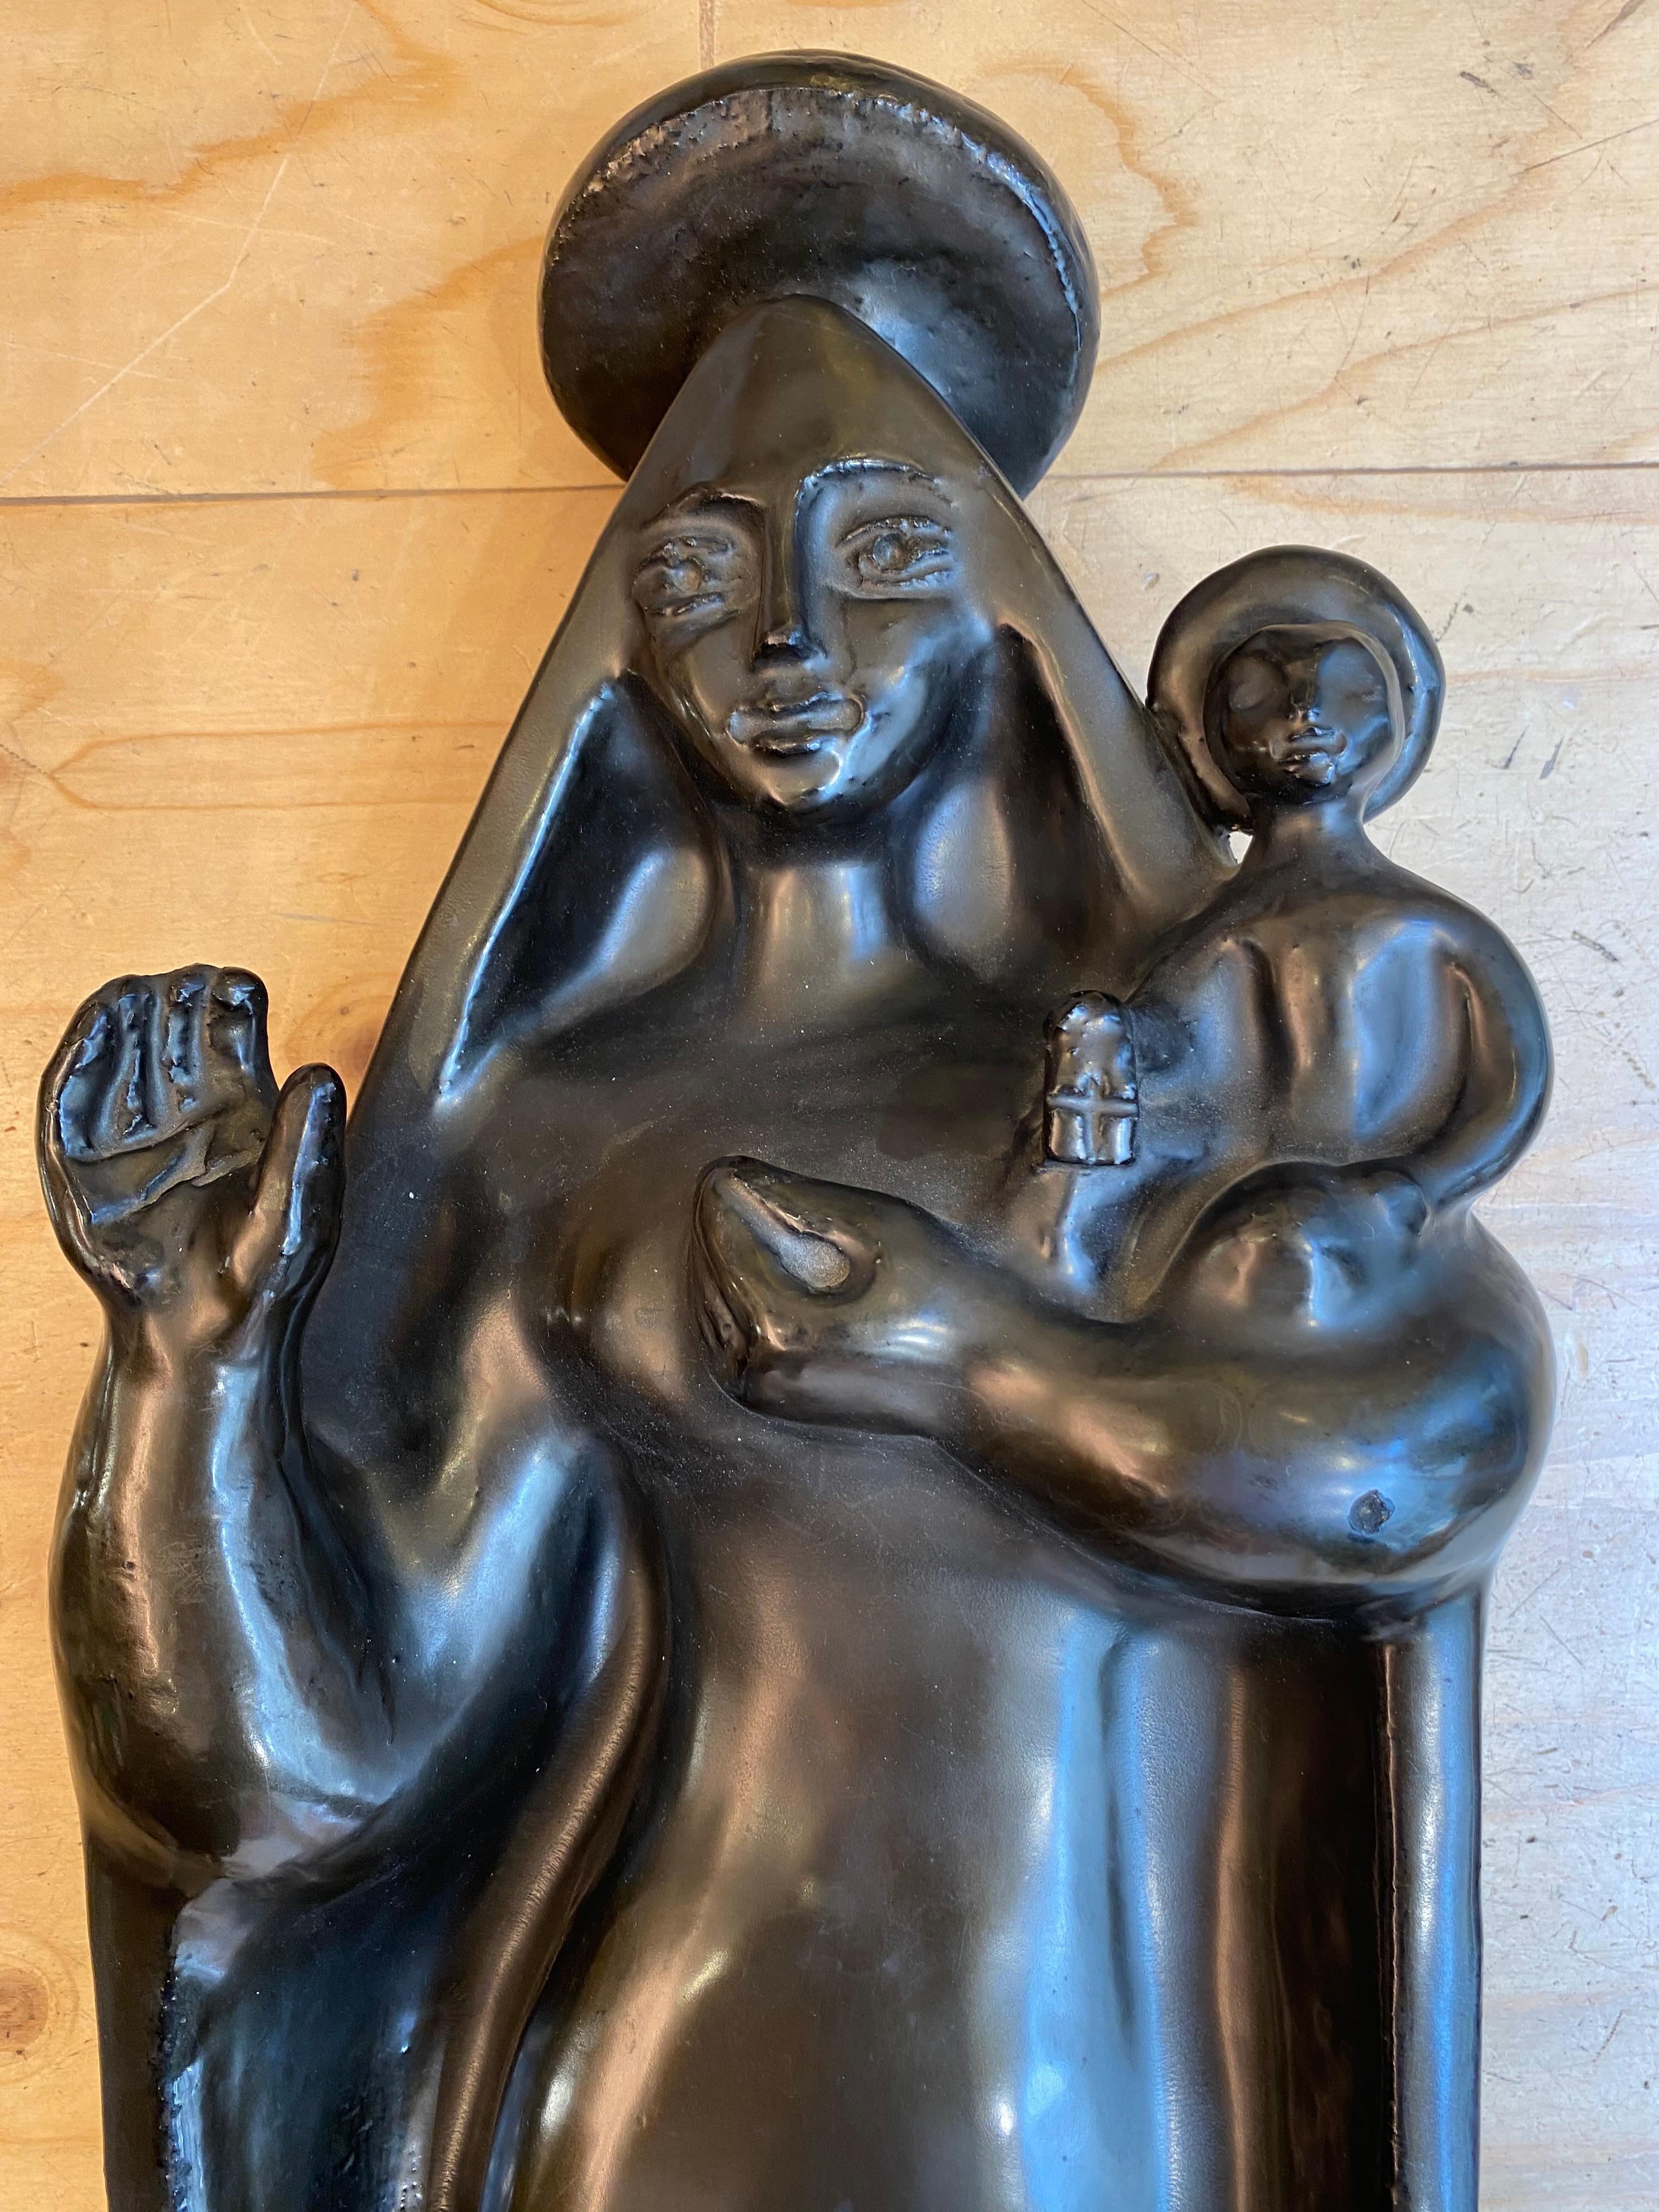 Georges Jouve
Virgin and child
Black glazed ceramic with iridescent metallic luster
Bears the signature on the back as well as the alpha symbol,
circa 1943-1944
Measures: H 76 x W 26 cms
9900 Euros.